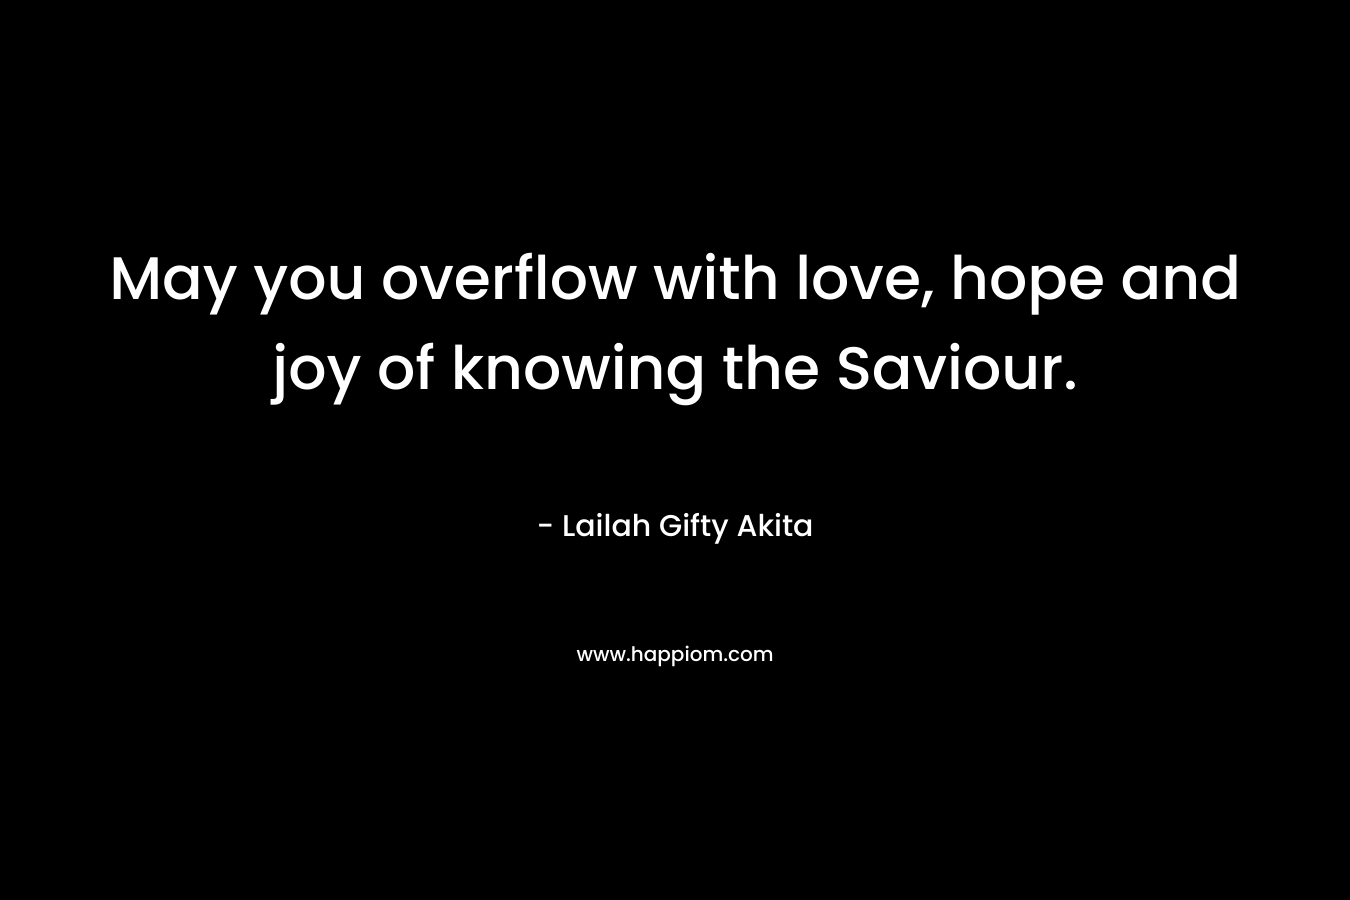 May you overflow with love, hope and joy of knowing the Saviour. – Lailah Gifty Akita